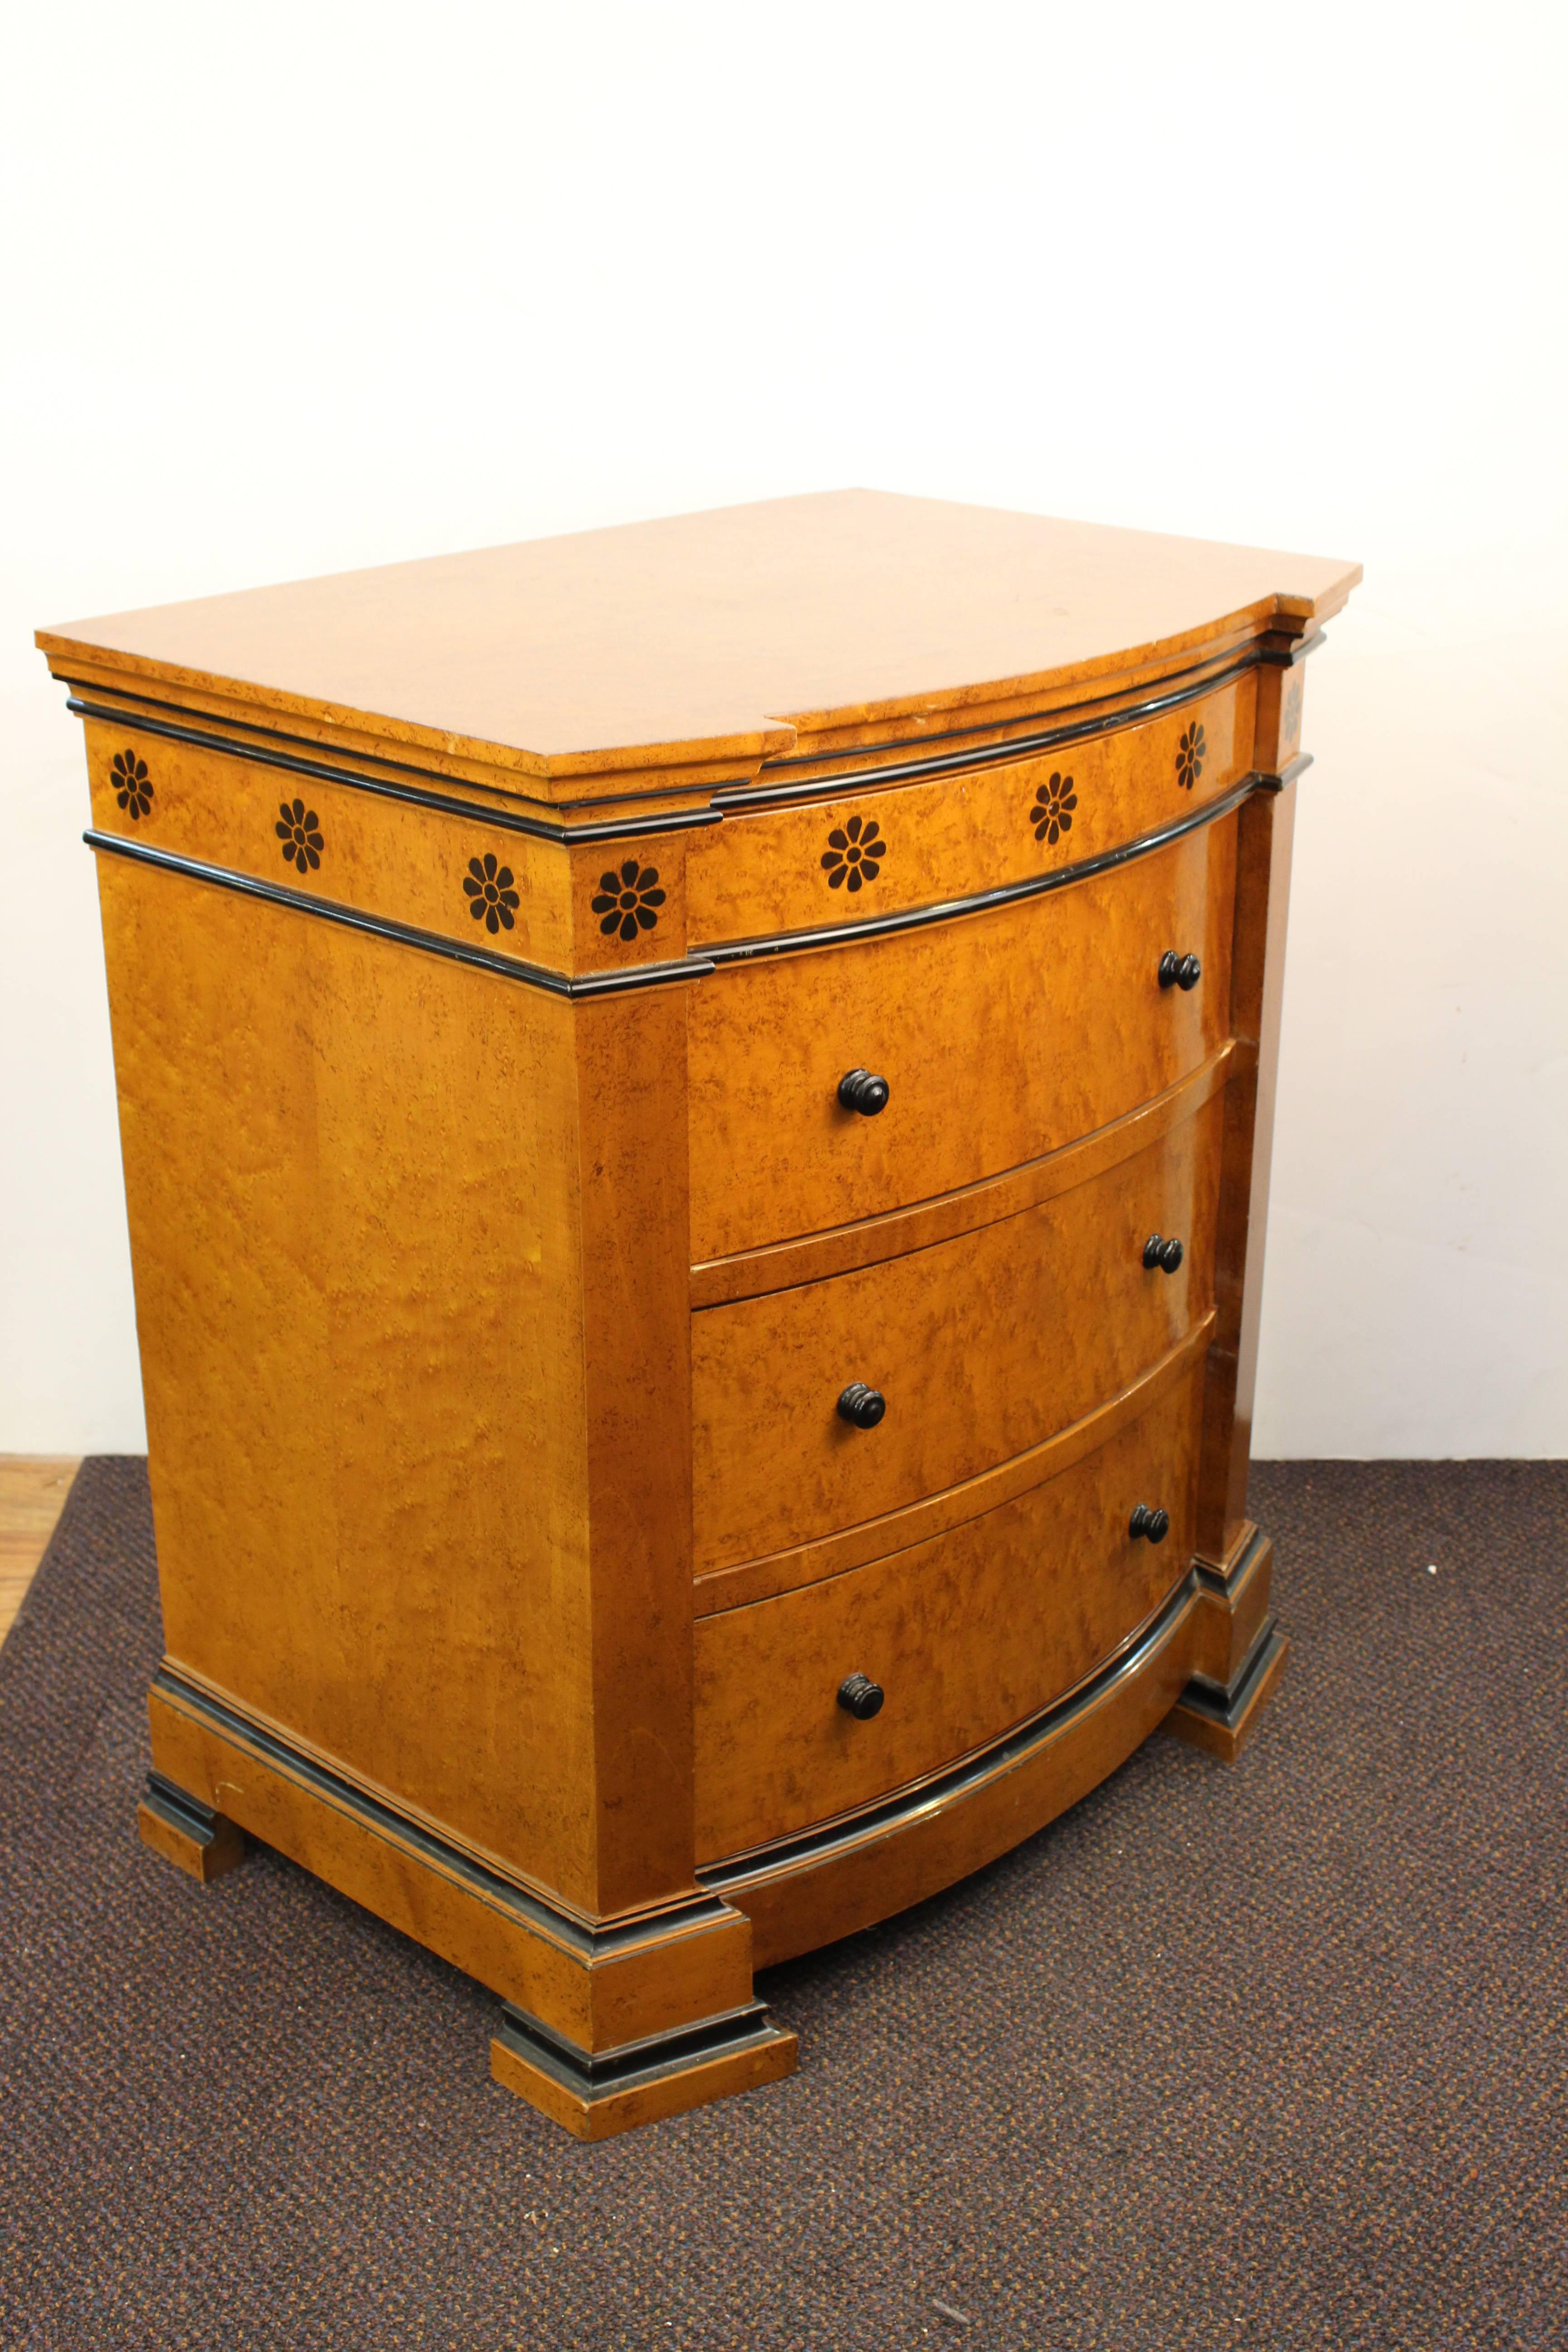 A pair of wooden nightstands in the Art Deco style, featuring three large sized drawers and a shallower drawer on top. A decorative border of inlaid rosettes runs around the upper part. The pair is in good vintage condition with age appropriate wear